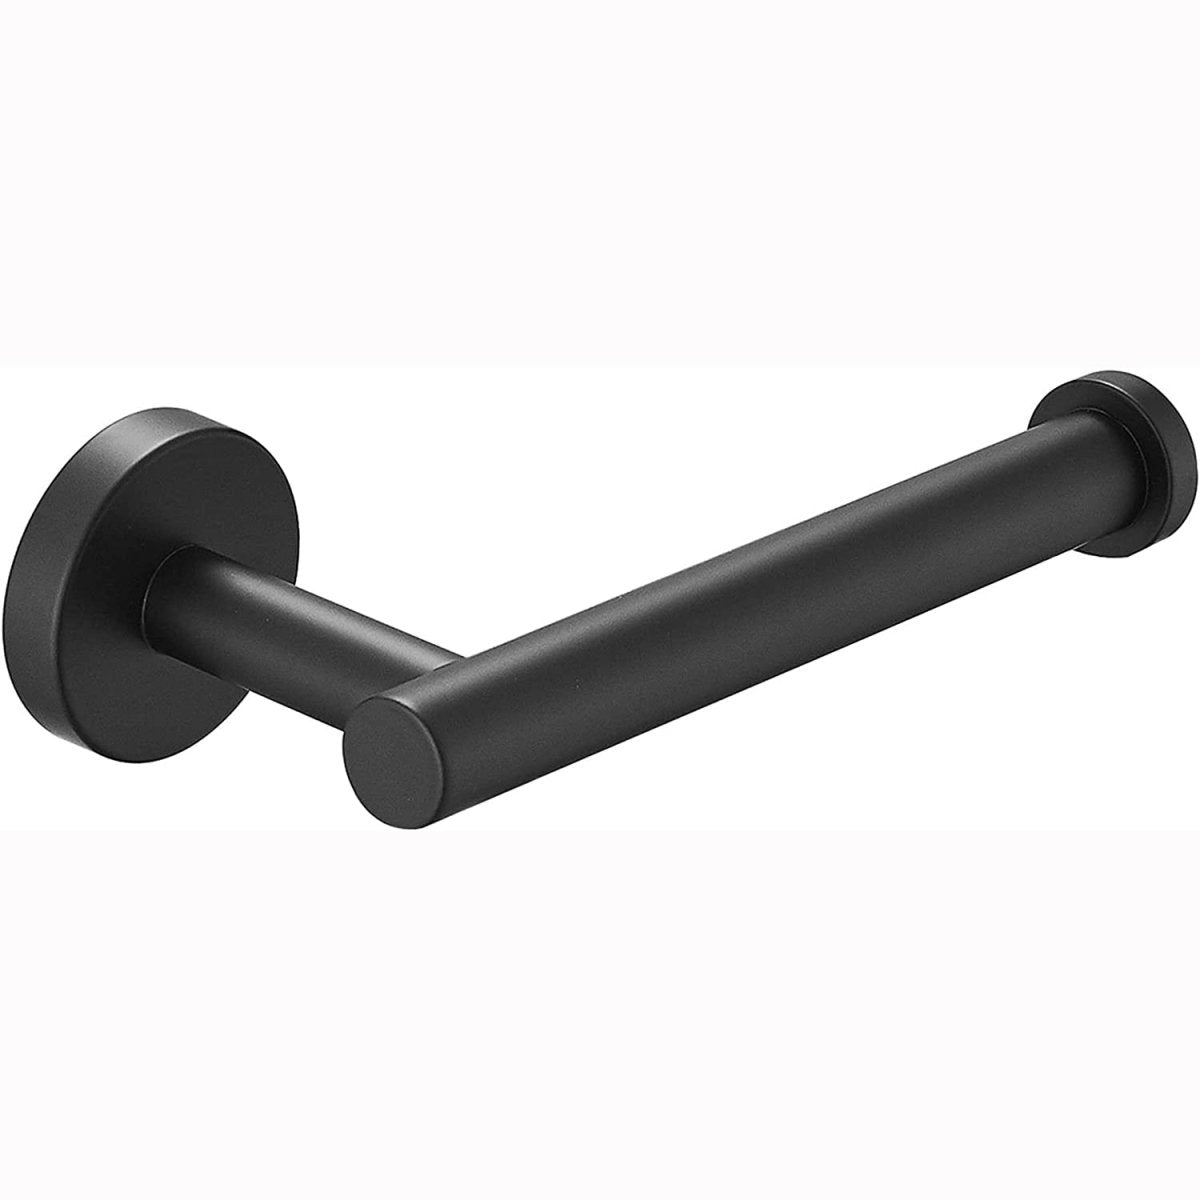 Single Post Toilet Paper Holder Wall Mounted in Matte Black - buyfaucet.com